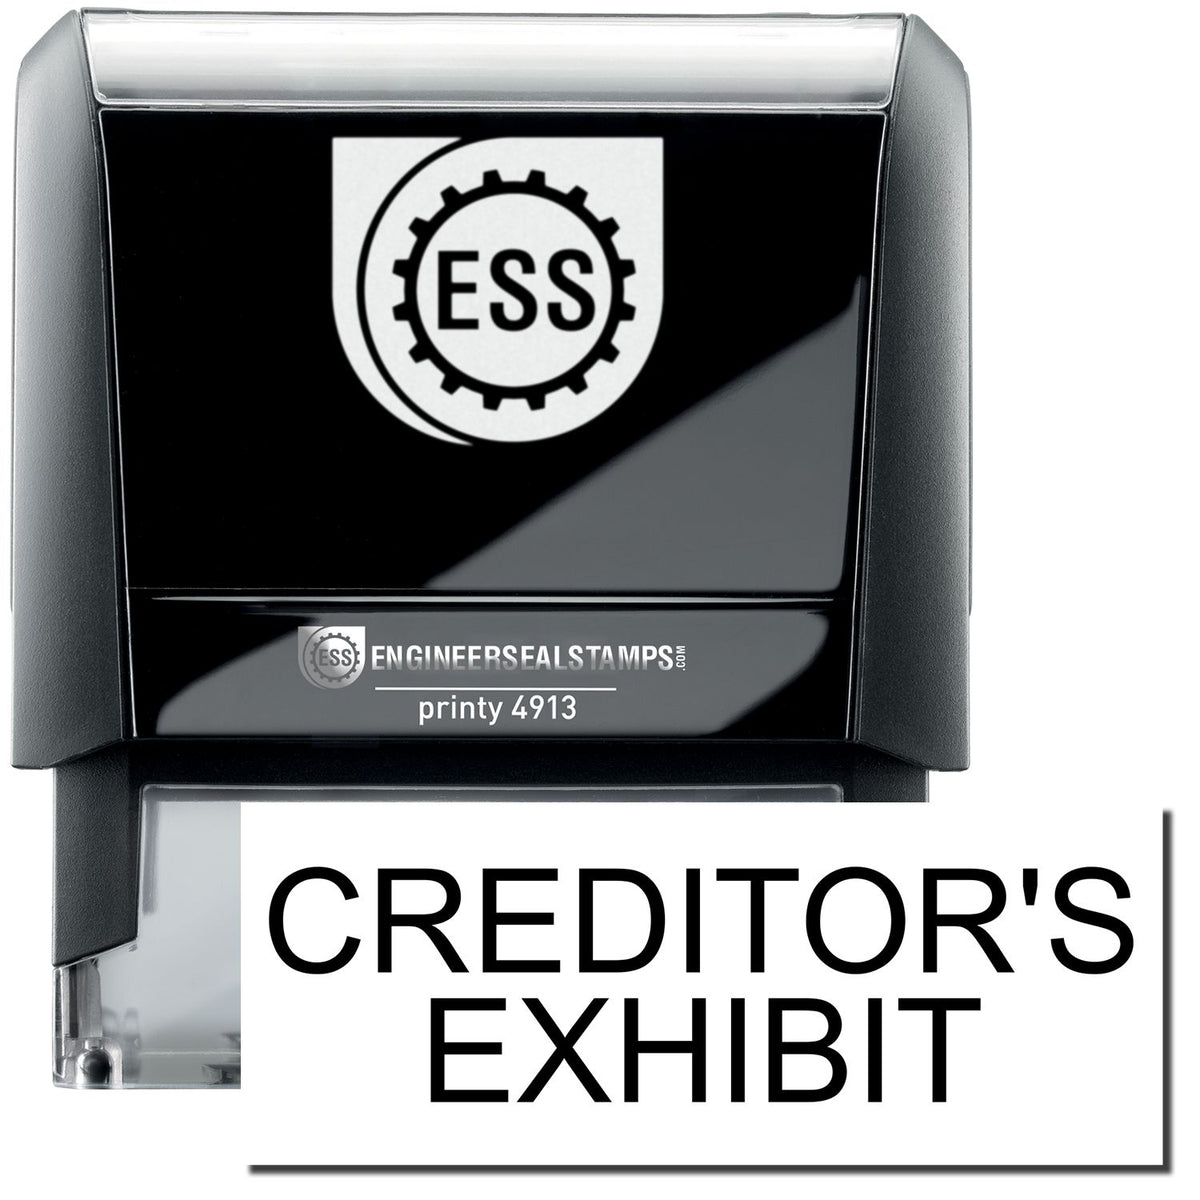 A self-inking stamp with a stamped image showing how the text &quot;CREDITOR&#39;S EXHIBIT&quot; in a large bold font is displayed by it.